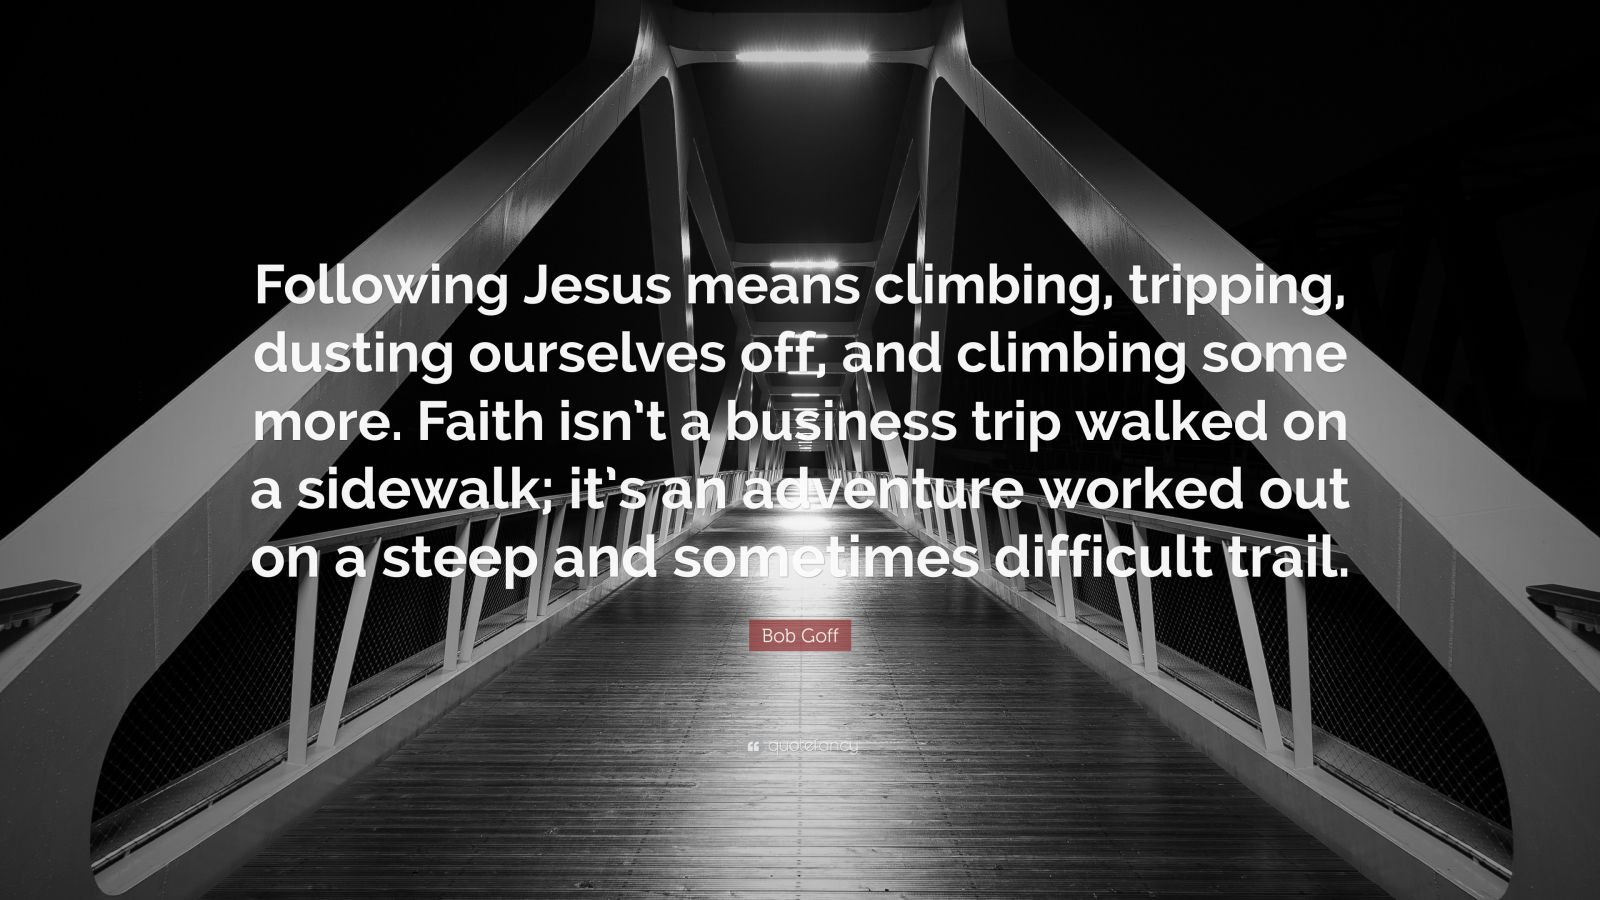 Bob Goff Quote: “Following Jesus means climbing, tripping, dusting